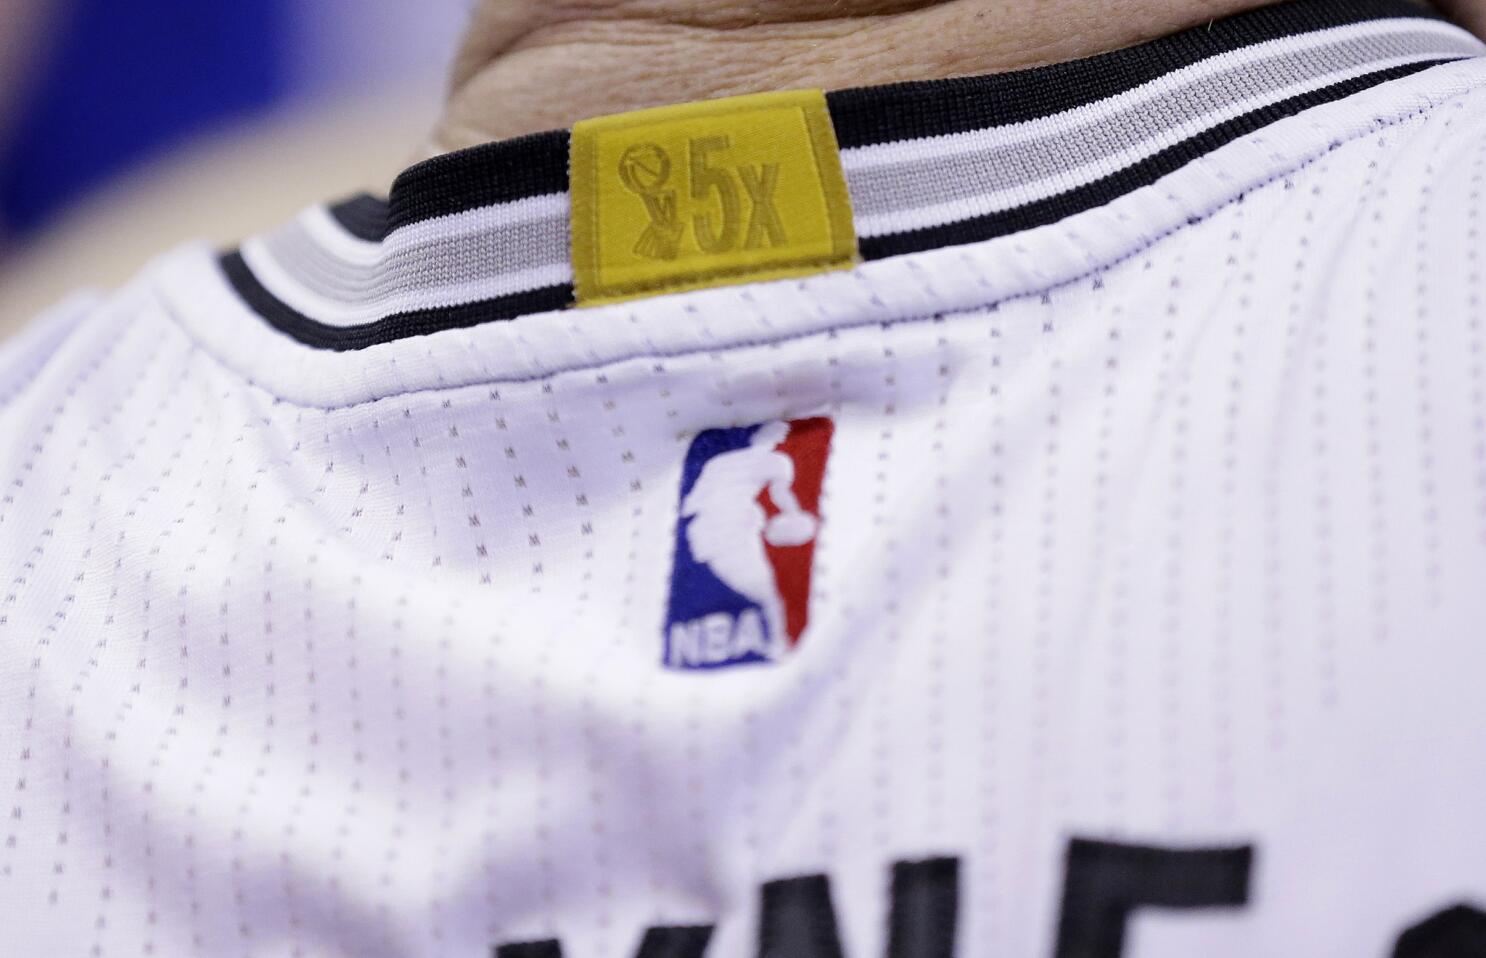 Here Are The 14 NBA Teams That Now Have Jersey Sponsorship Deals